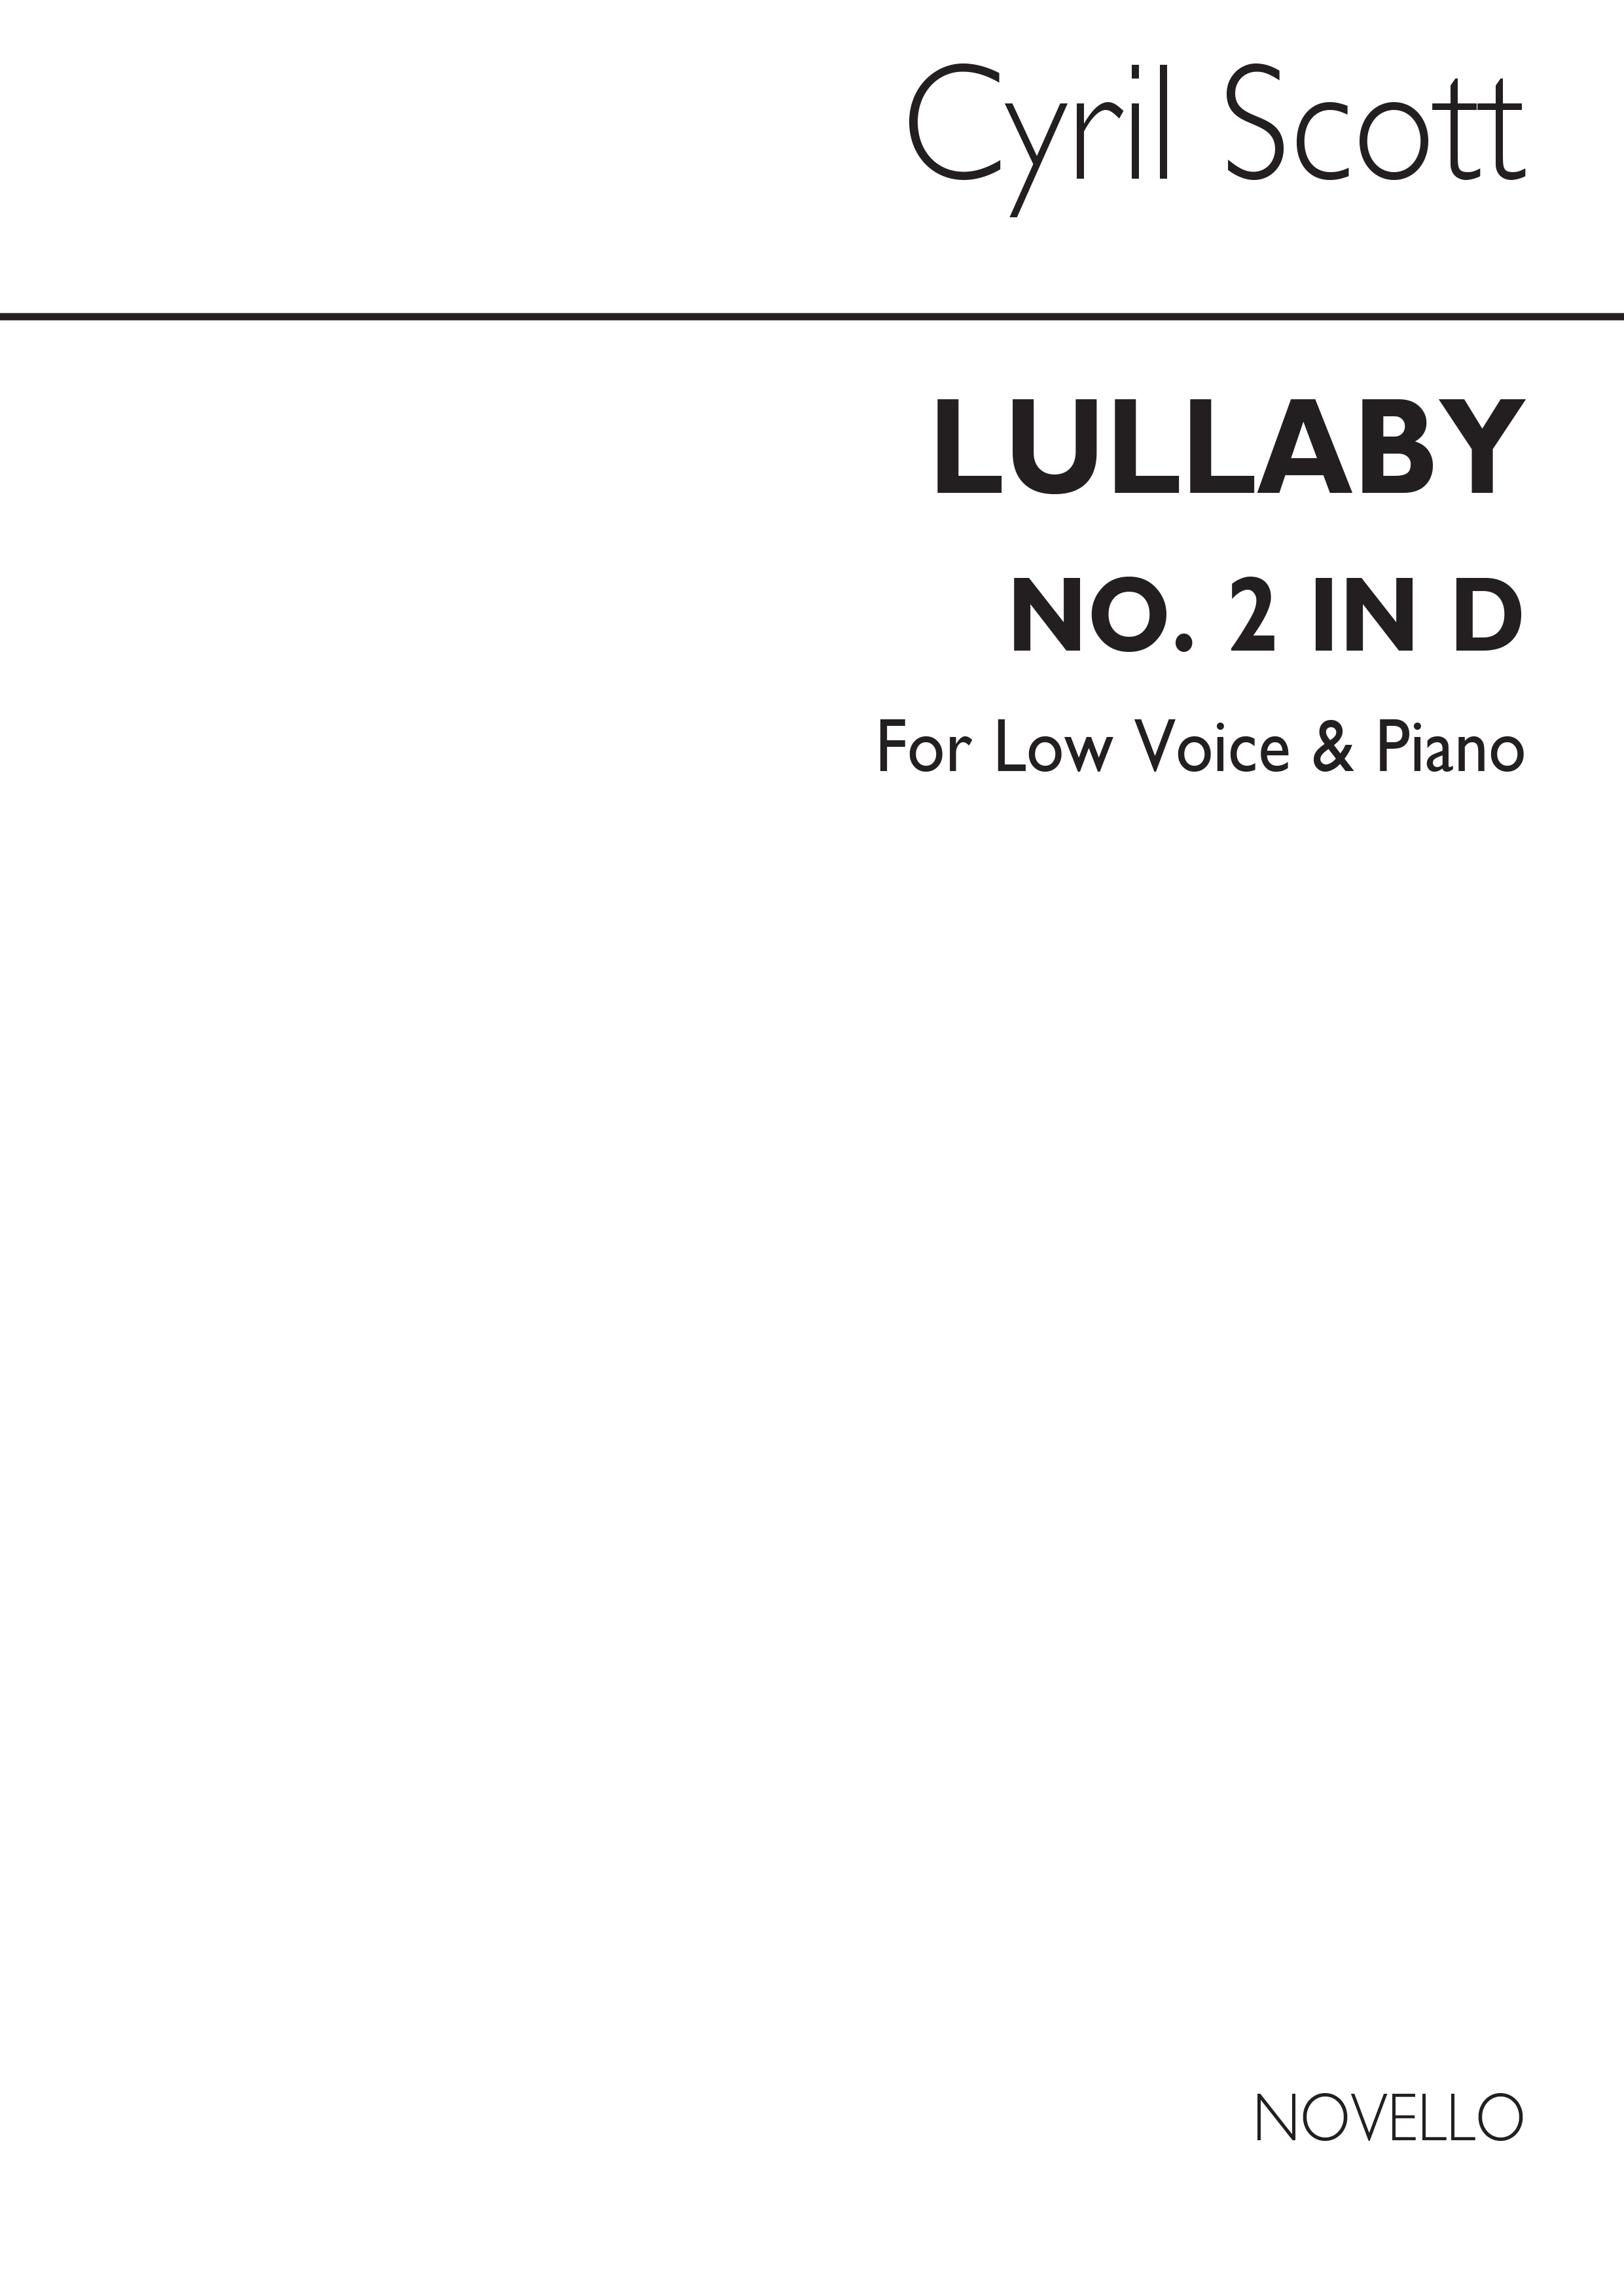 Scott: Lullaby Op.57 No.2 In Db for Low Voice with Piano acc.